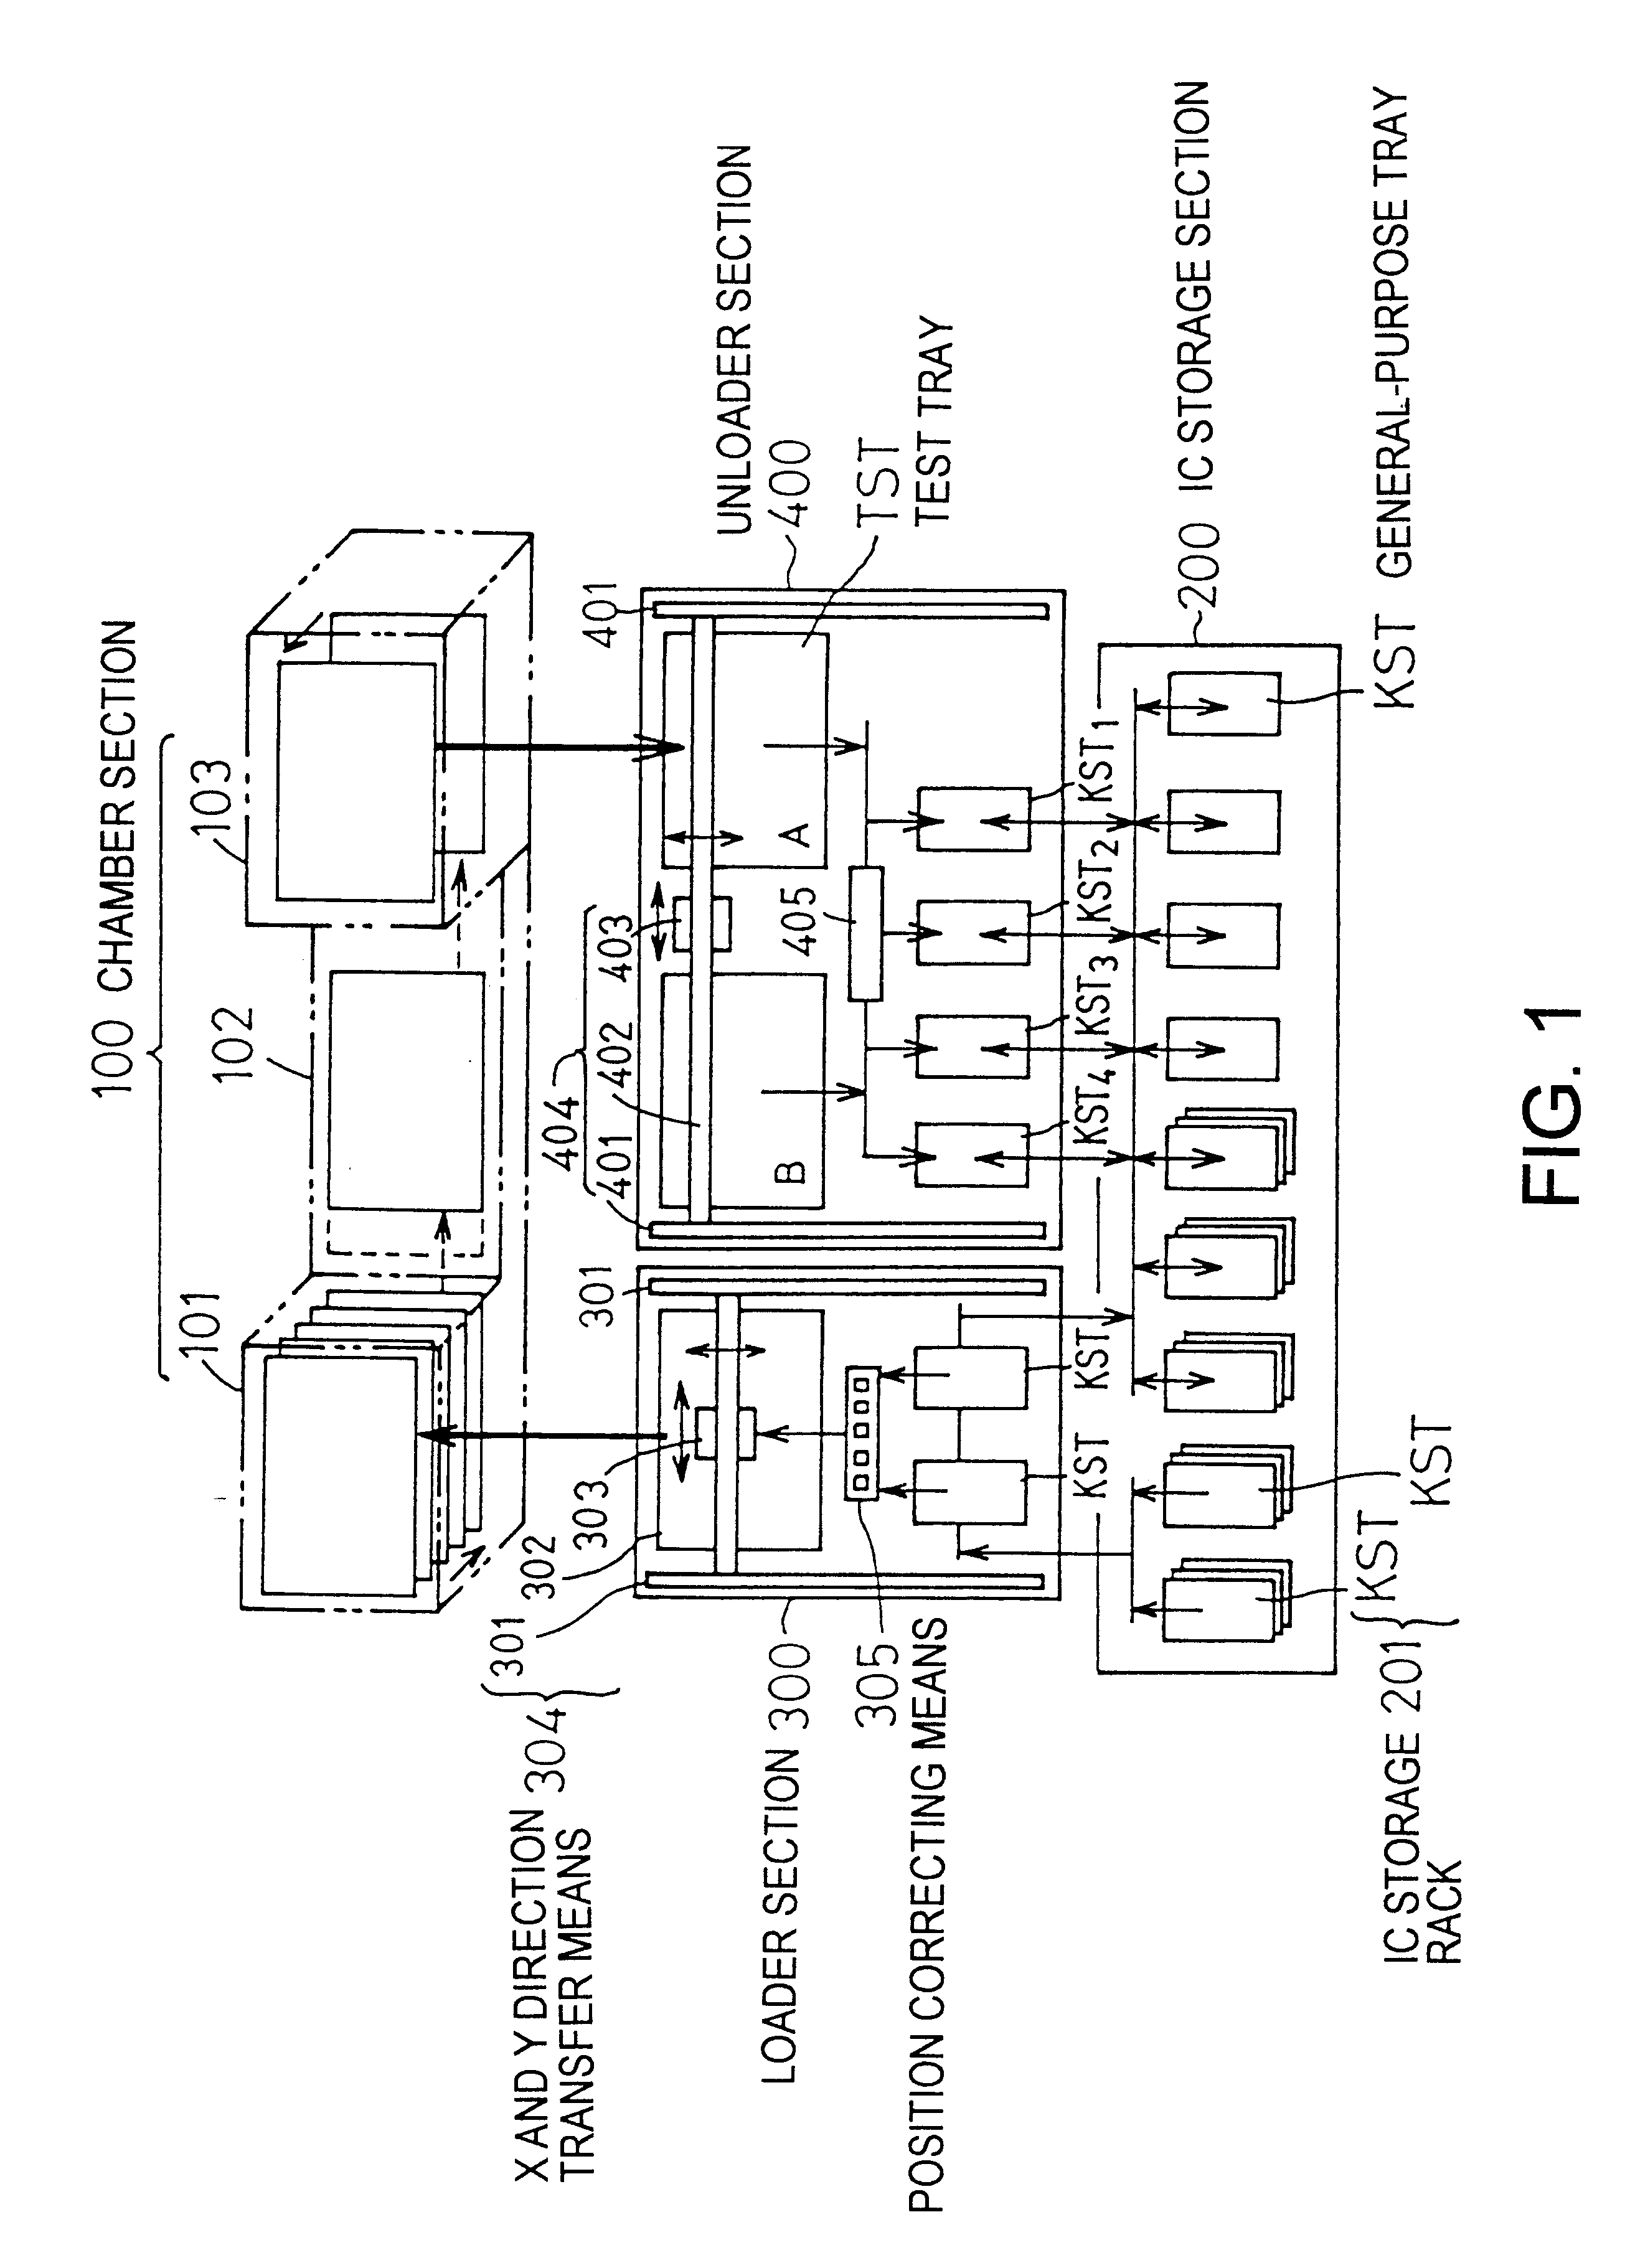 Semiconductor device testing apparatus